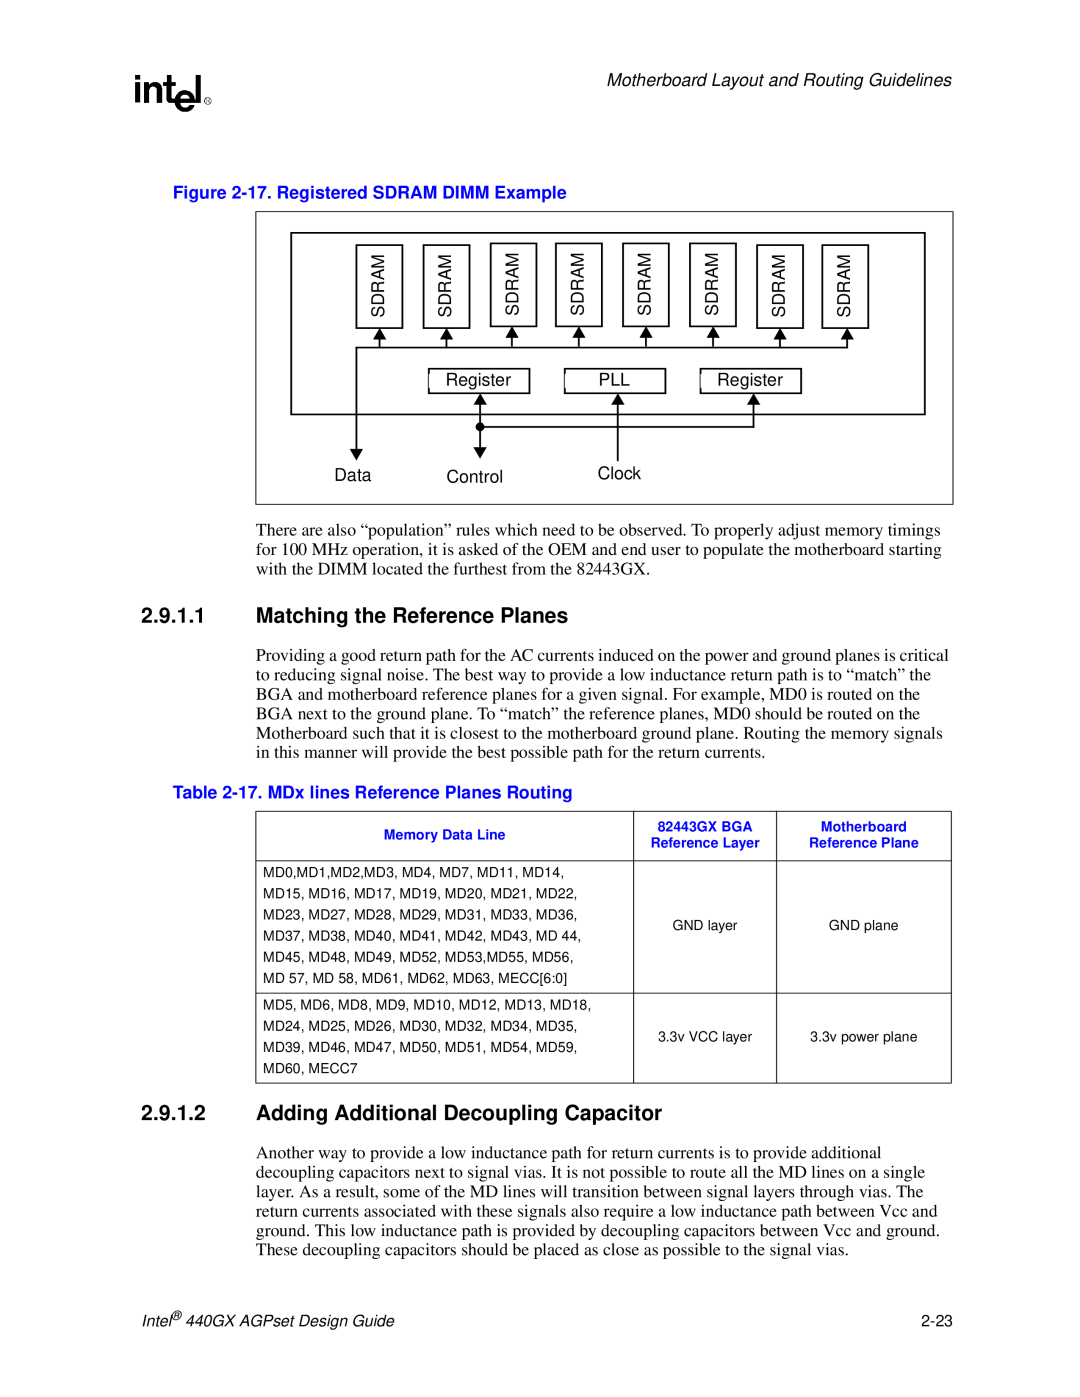 Intel 440GX manual Matching the Reference Planes, Adding Additional Decoupling Capacitor, 17. Registered SDRAM DIMM Example 